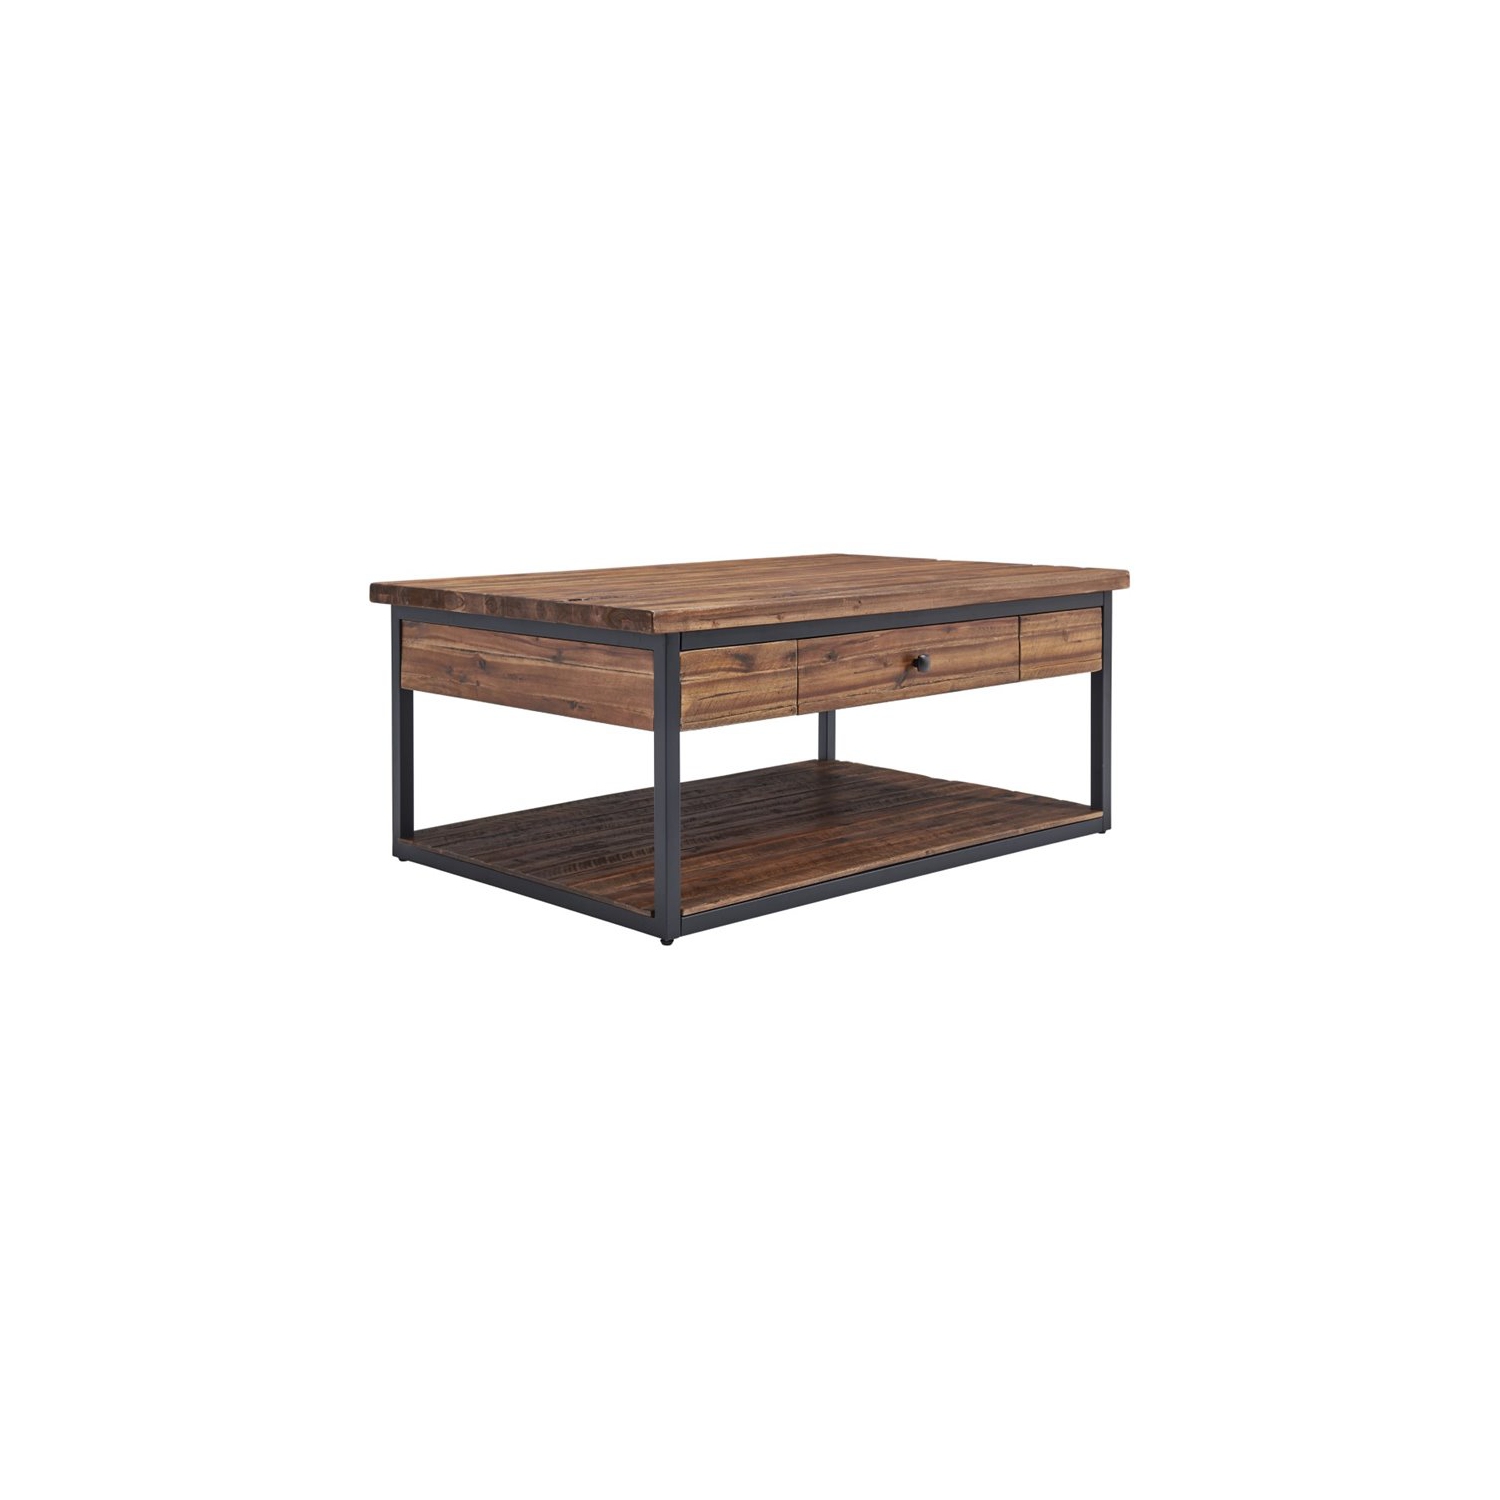 Alaterre Claremont 48"L Rustic Brown Wood Coffee Table with Drawer and Low Shelf